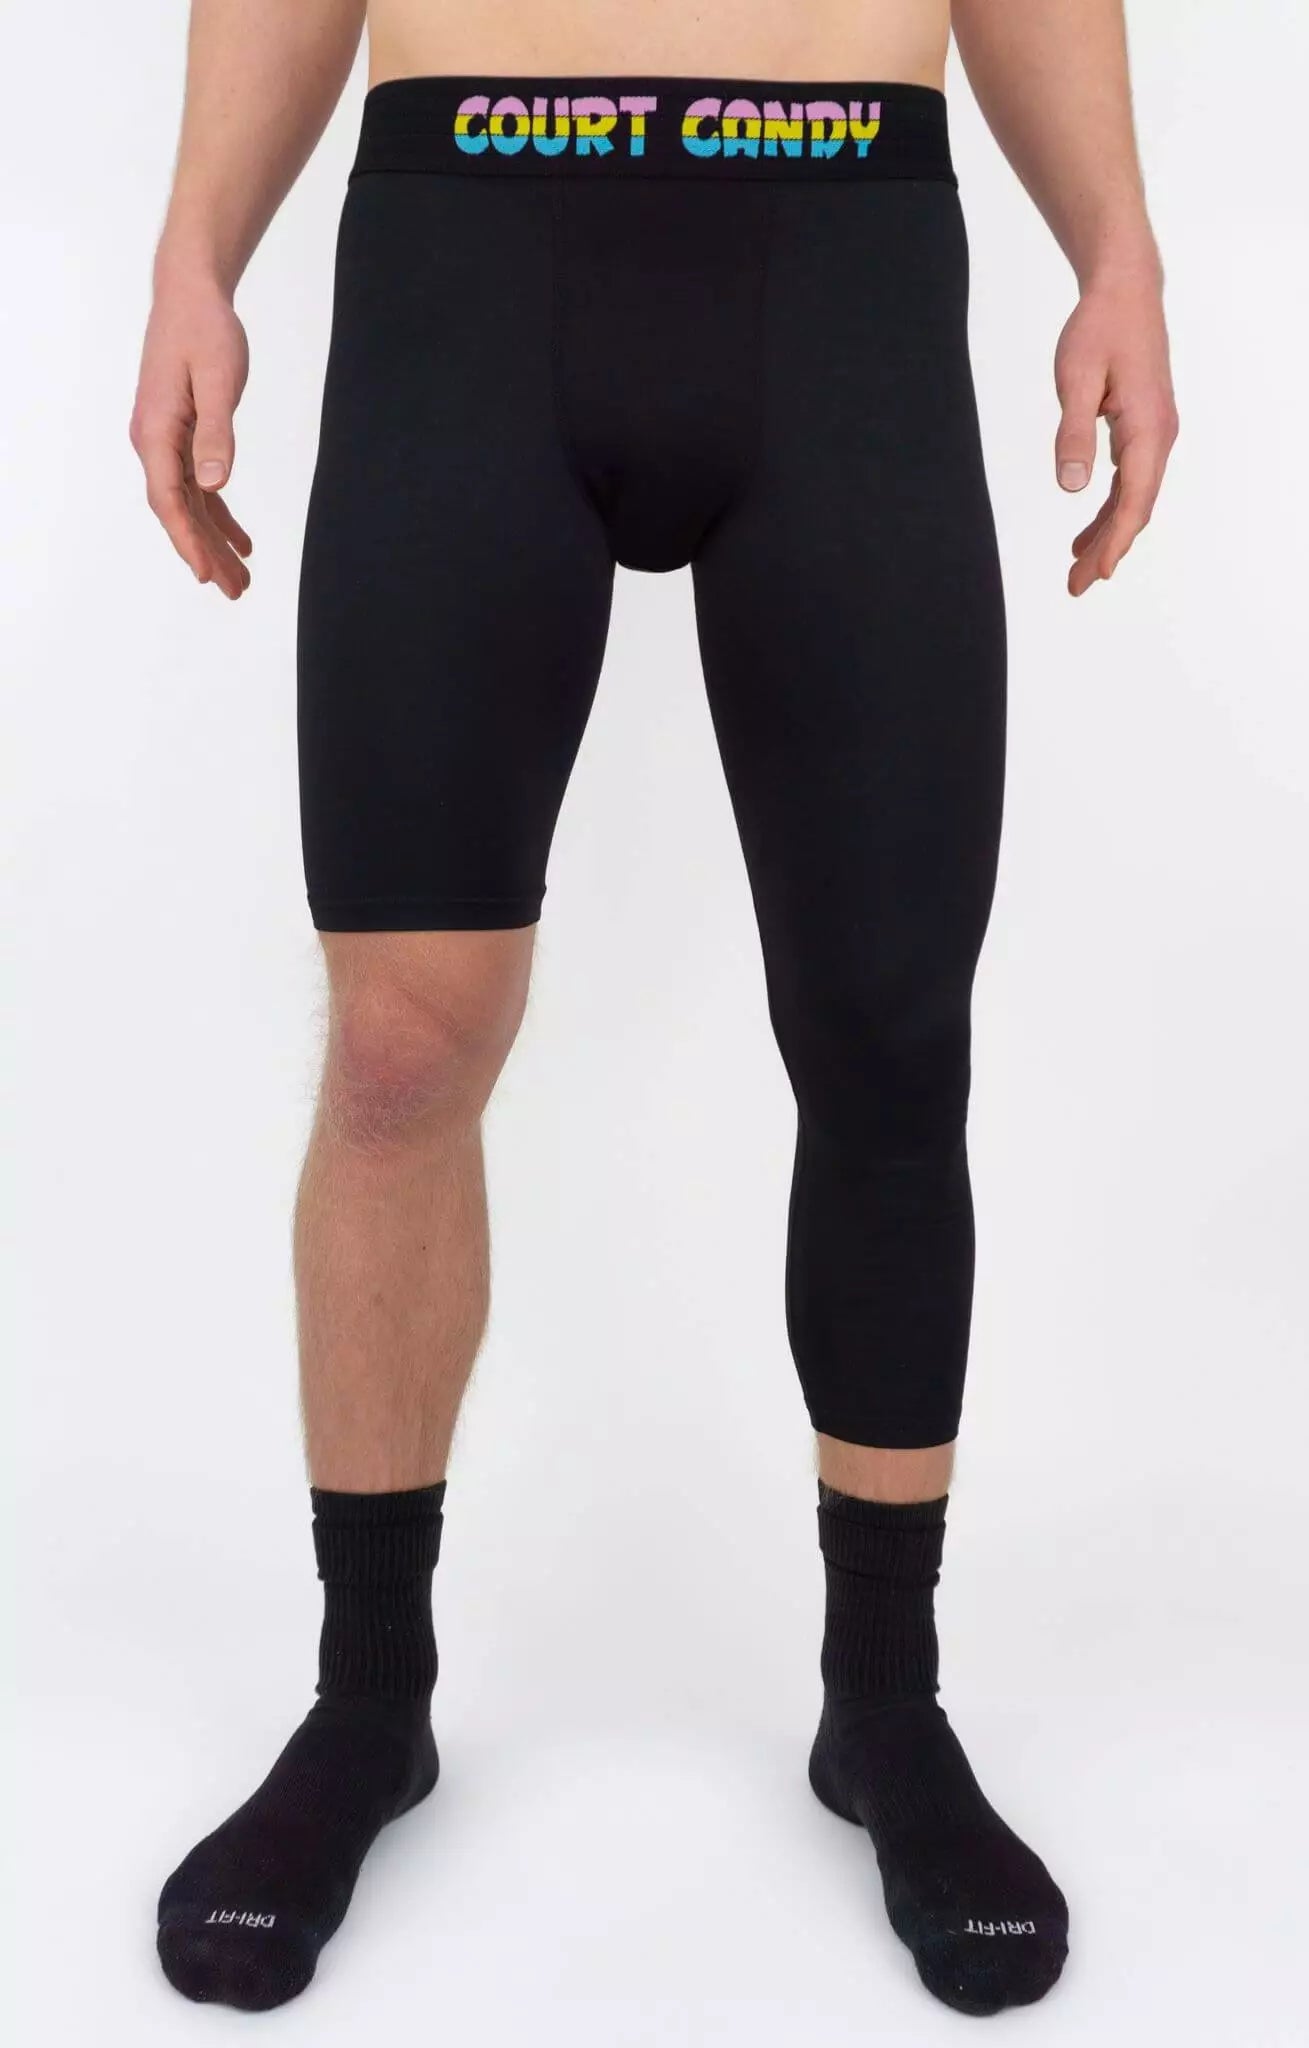 One Leg Compression Tights (Black) - For Basketball, Football